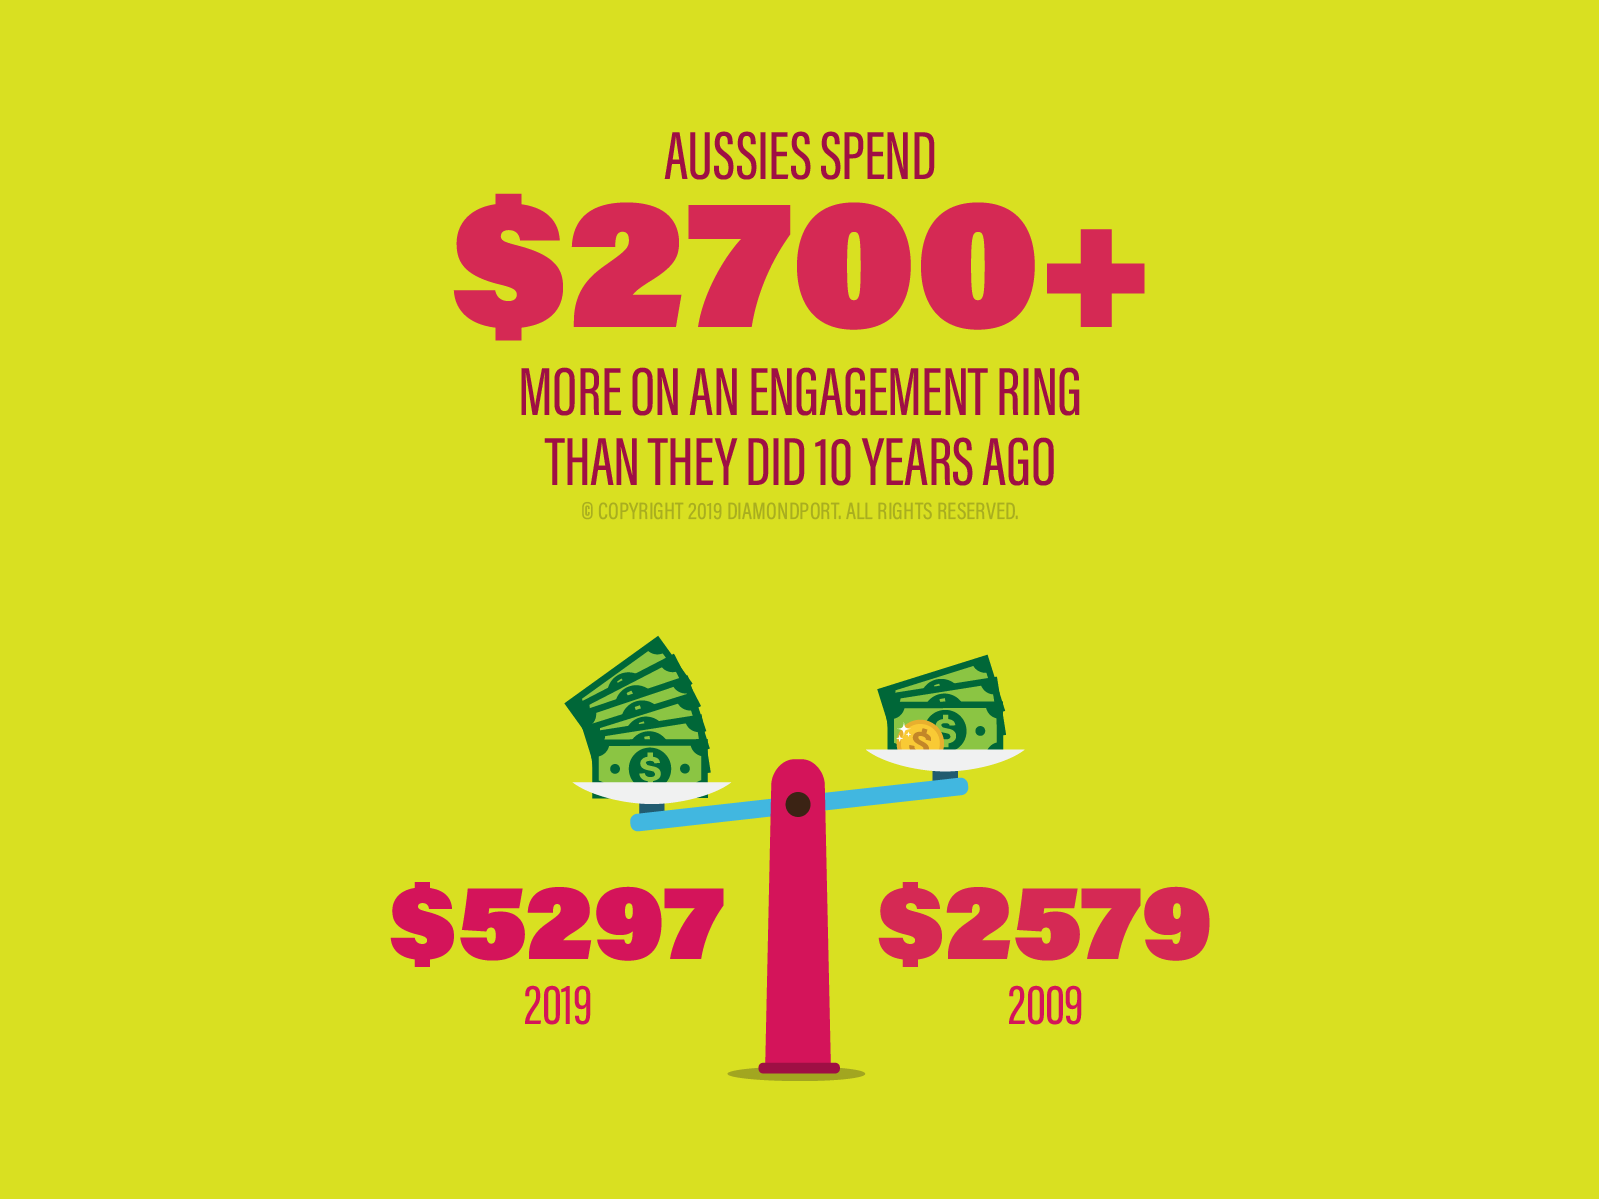 Aussies spend $2700 - more on an engagement ring than they did 10 years ago